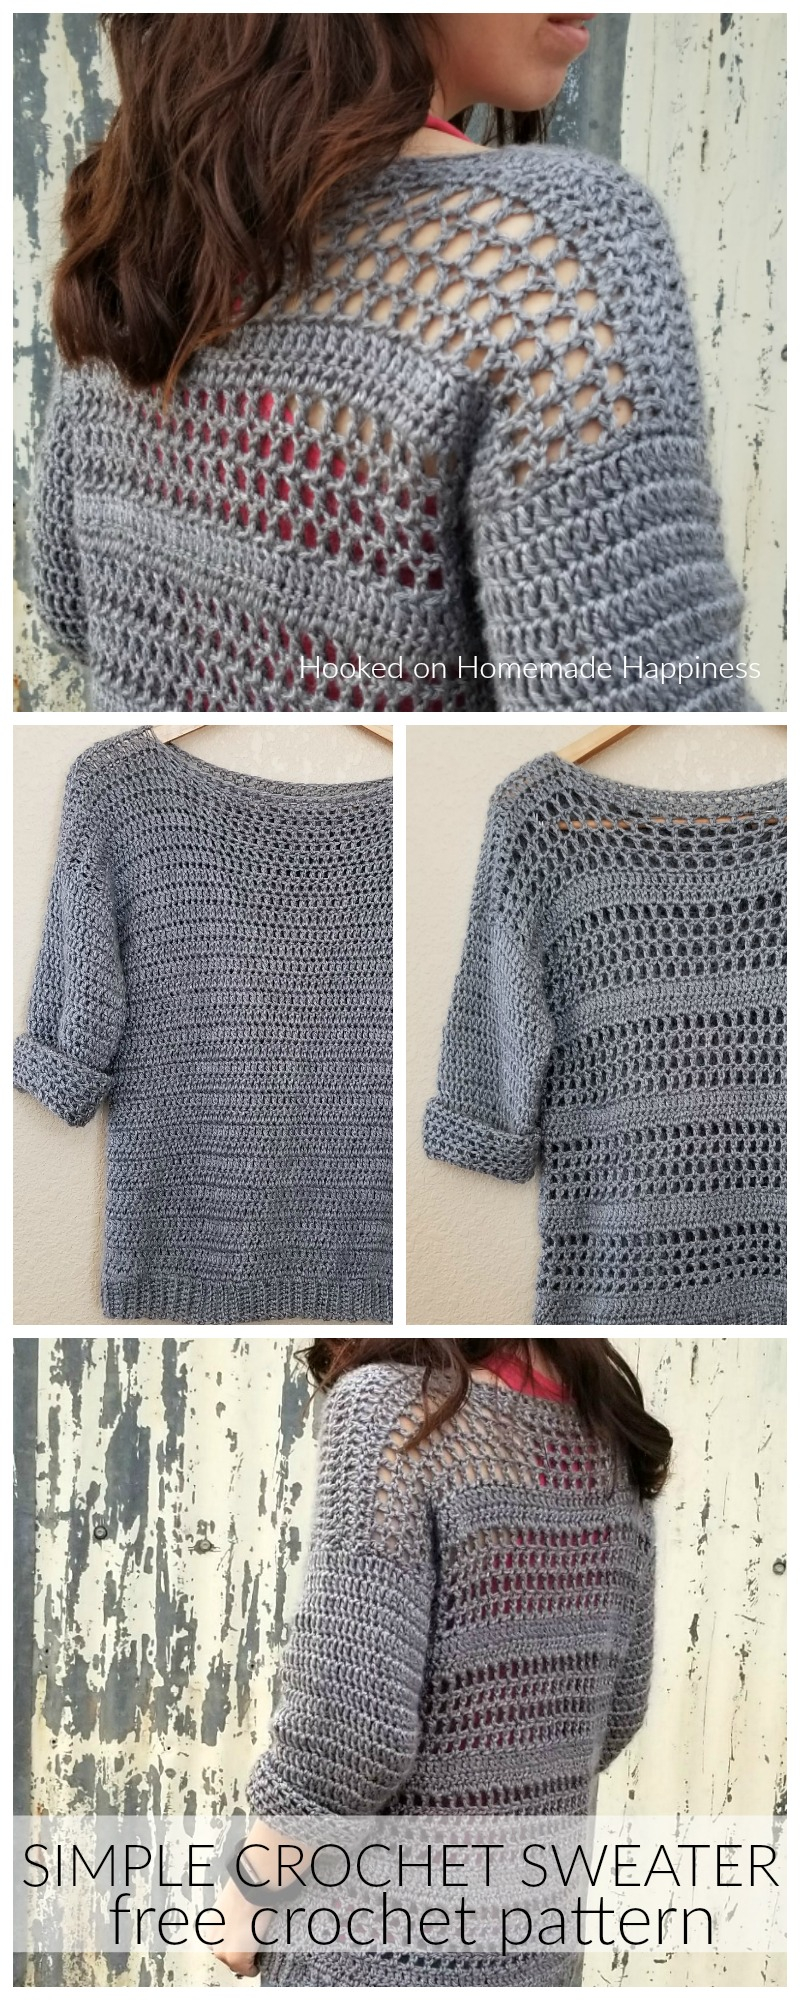 Free Crochet Sweater Patterns Simple Crochet Sweater Pattern Hooked On Homemade Happiness